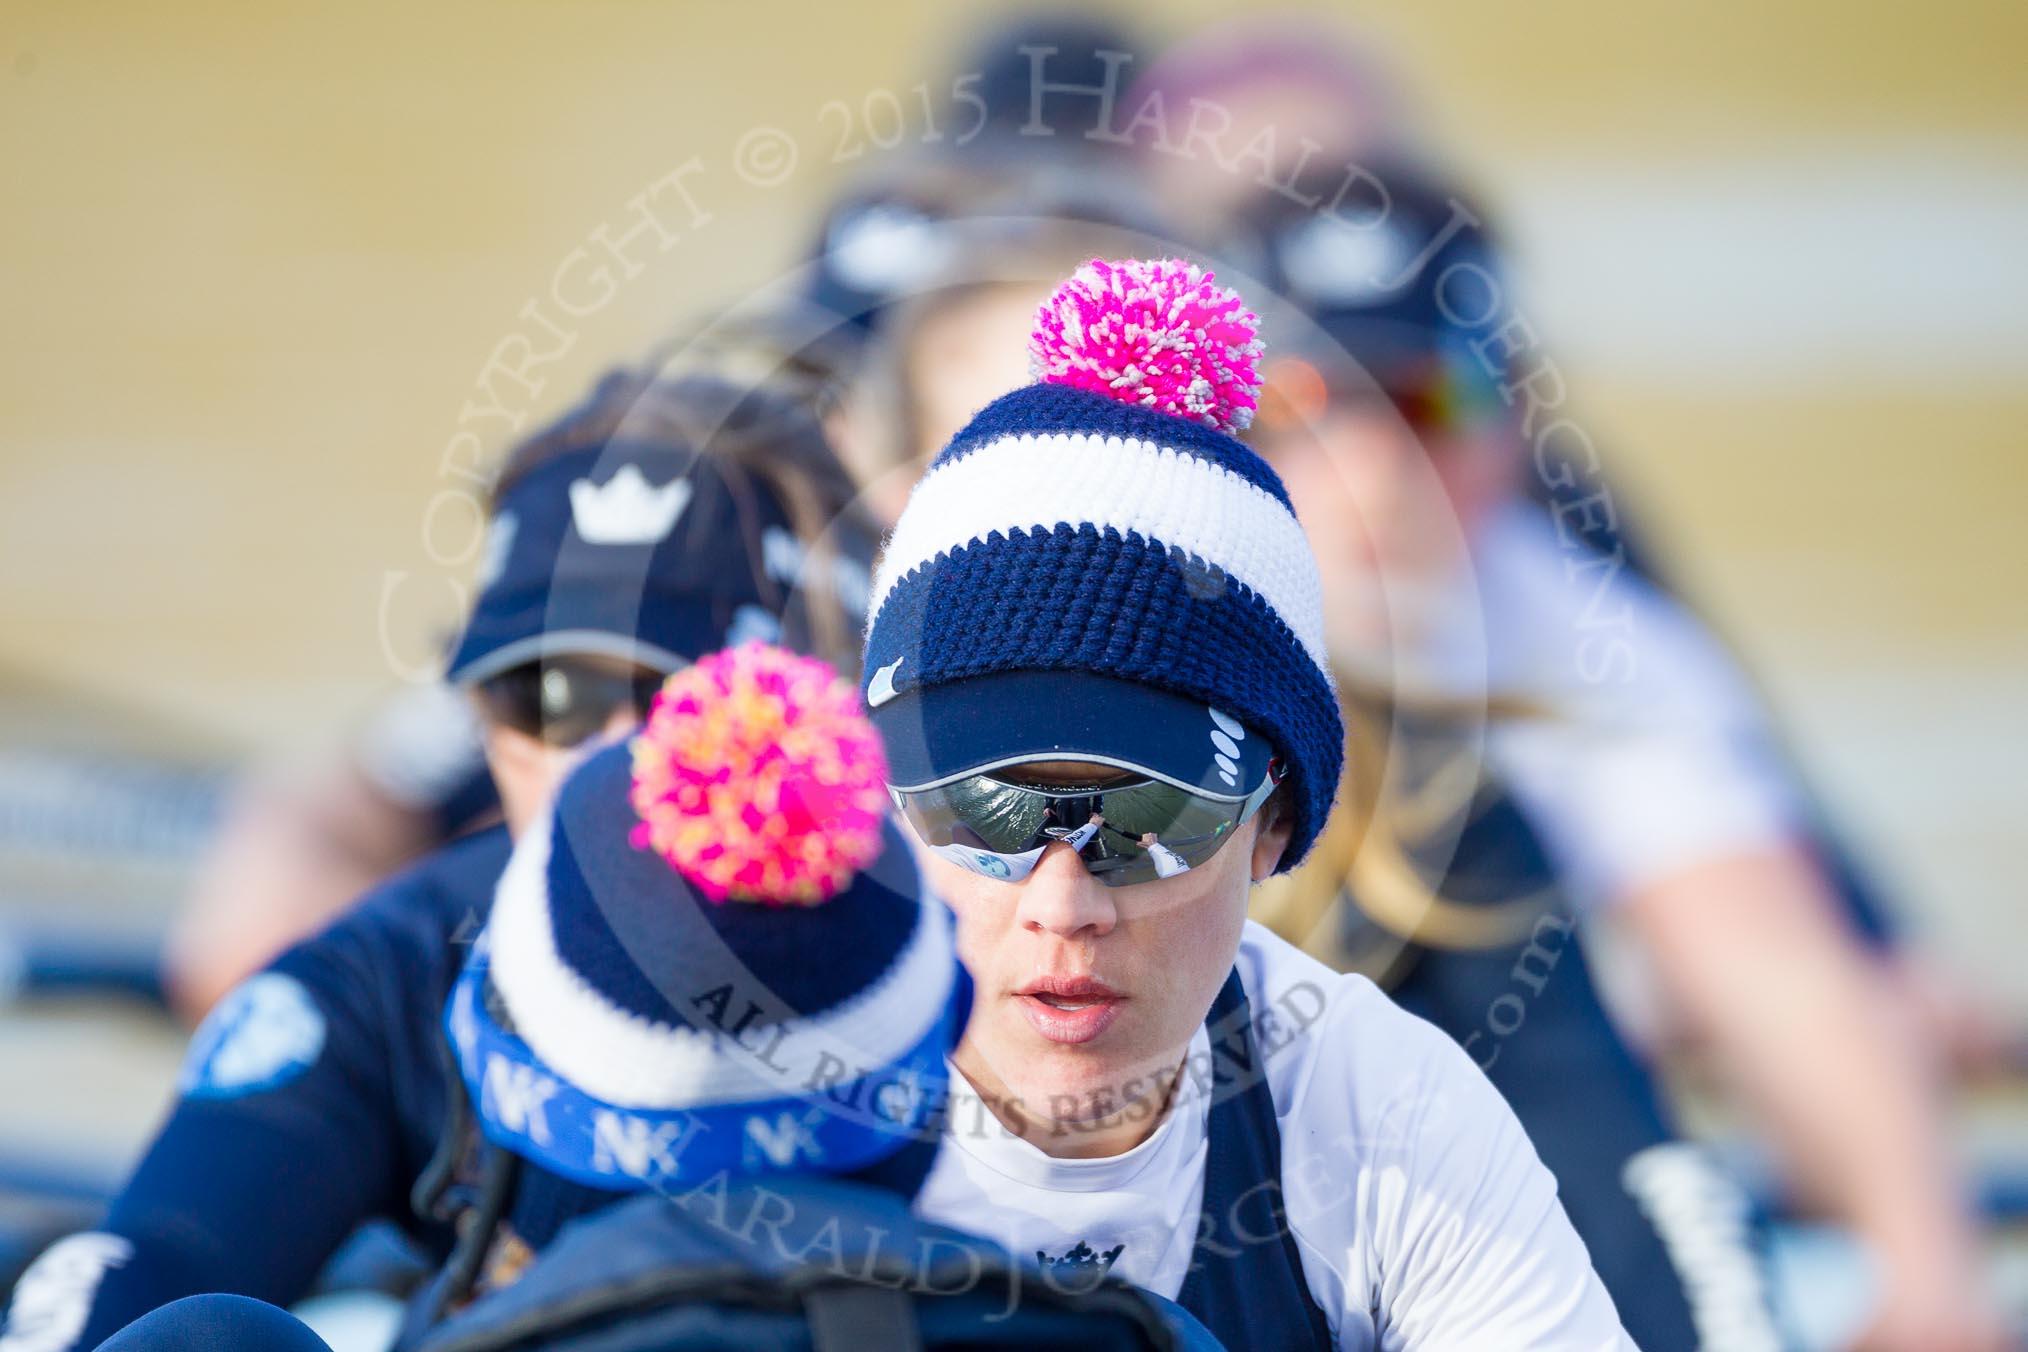 The Boat Race season 2015: OUWBC training Wallingford.

Wallingford,

United Kingdom,
on 04 March 2015 at 16:05, image #168